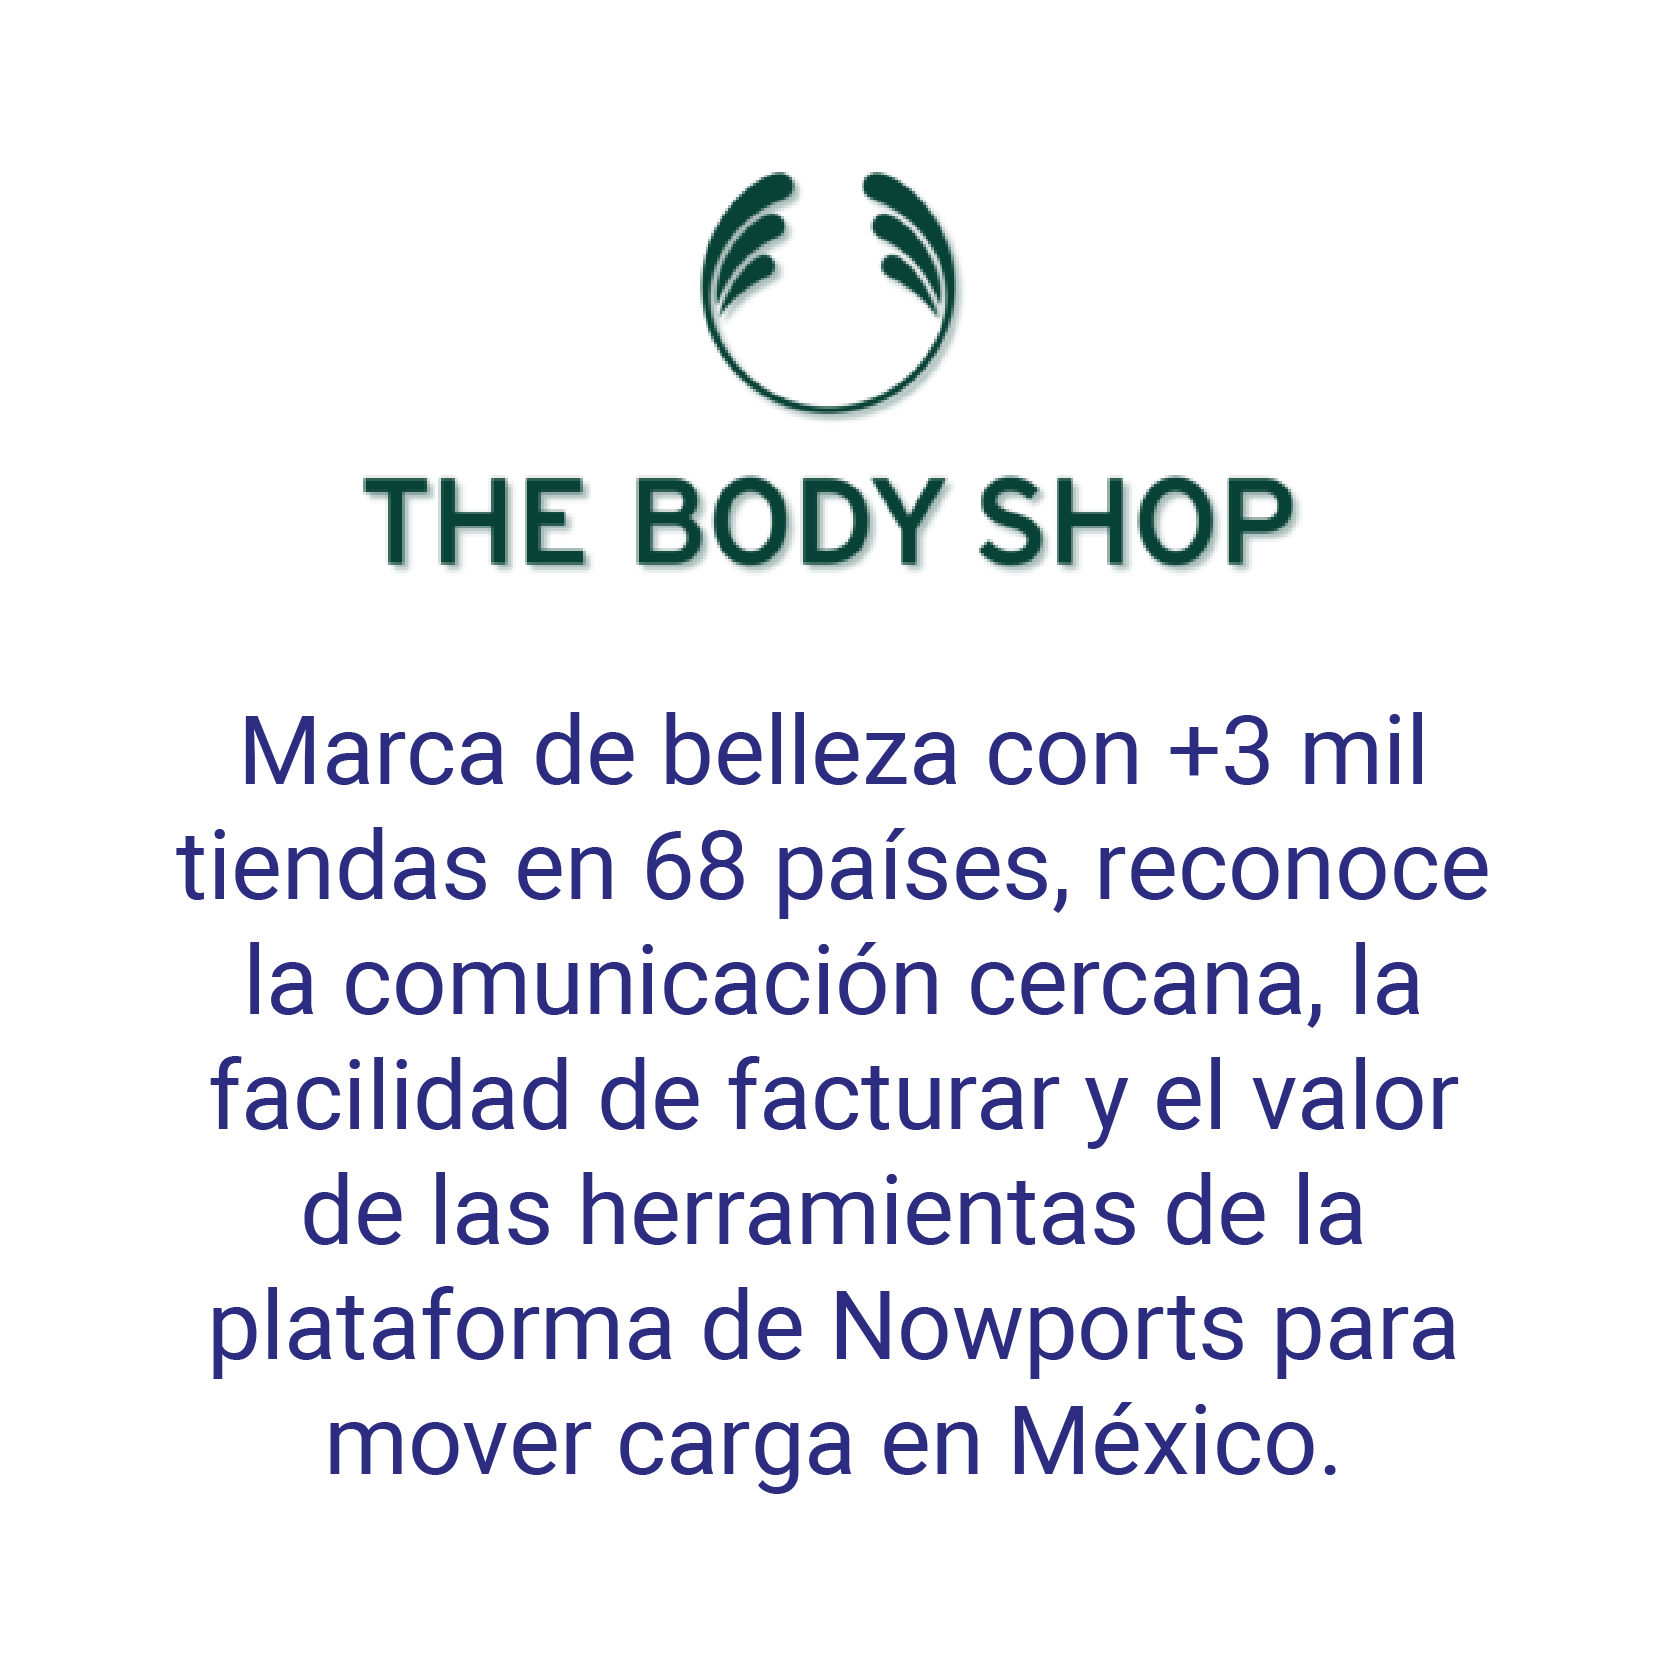 The body shop img